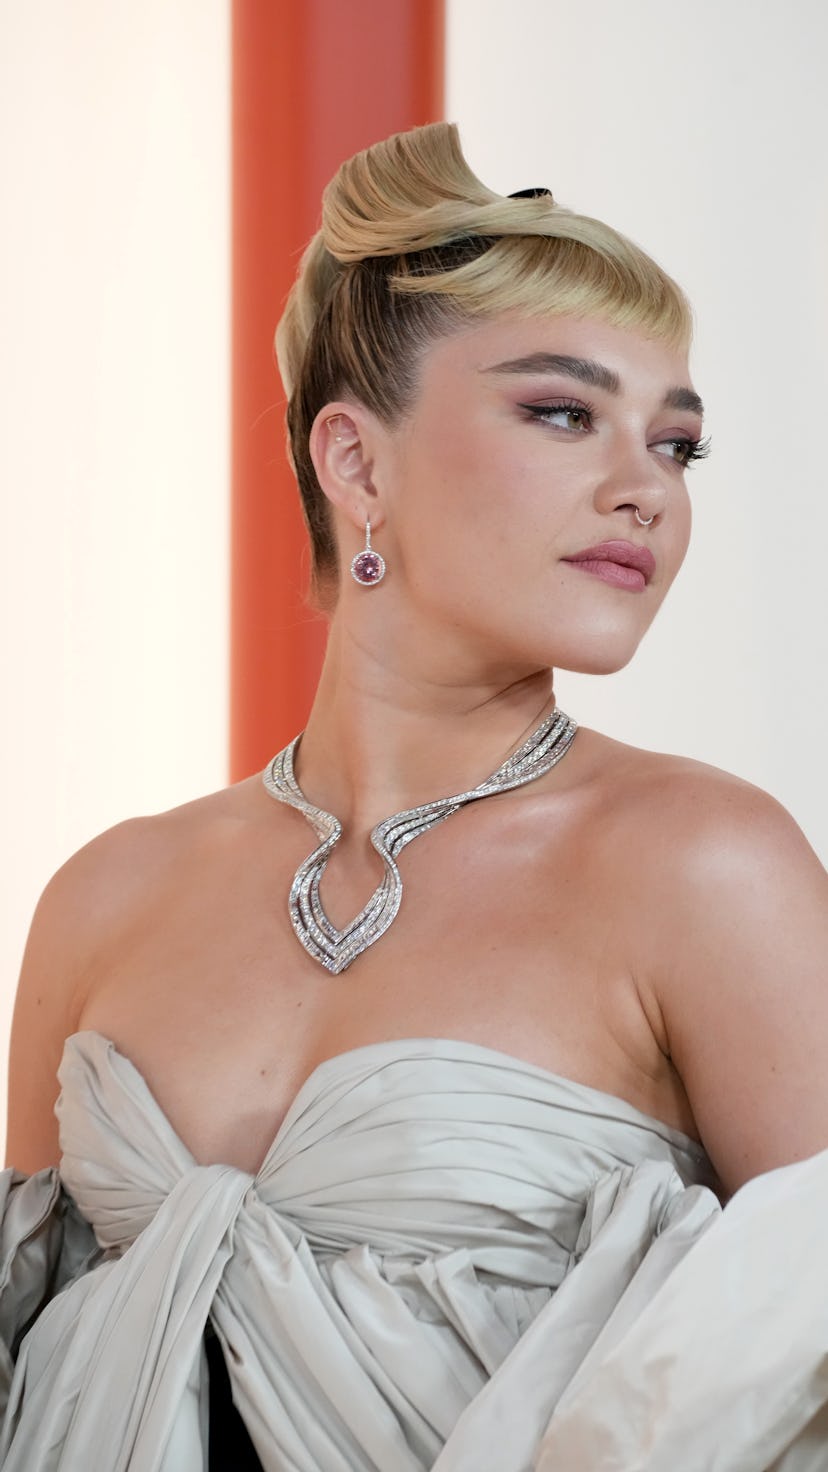 Florence Pugh attends the 95th Annual Academy Awards 